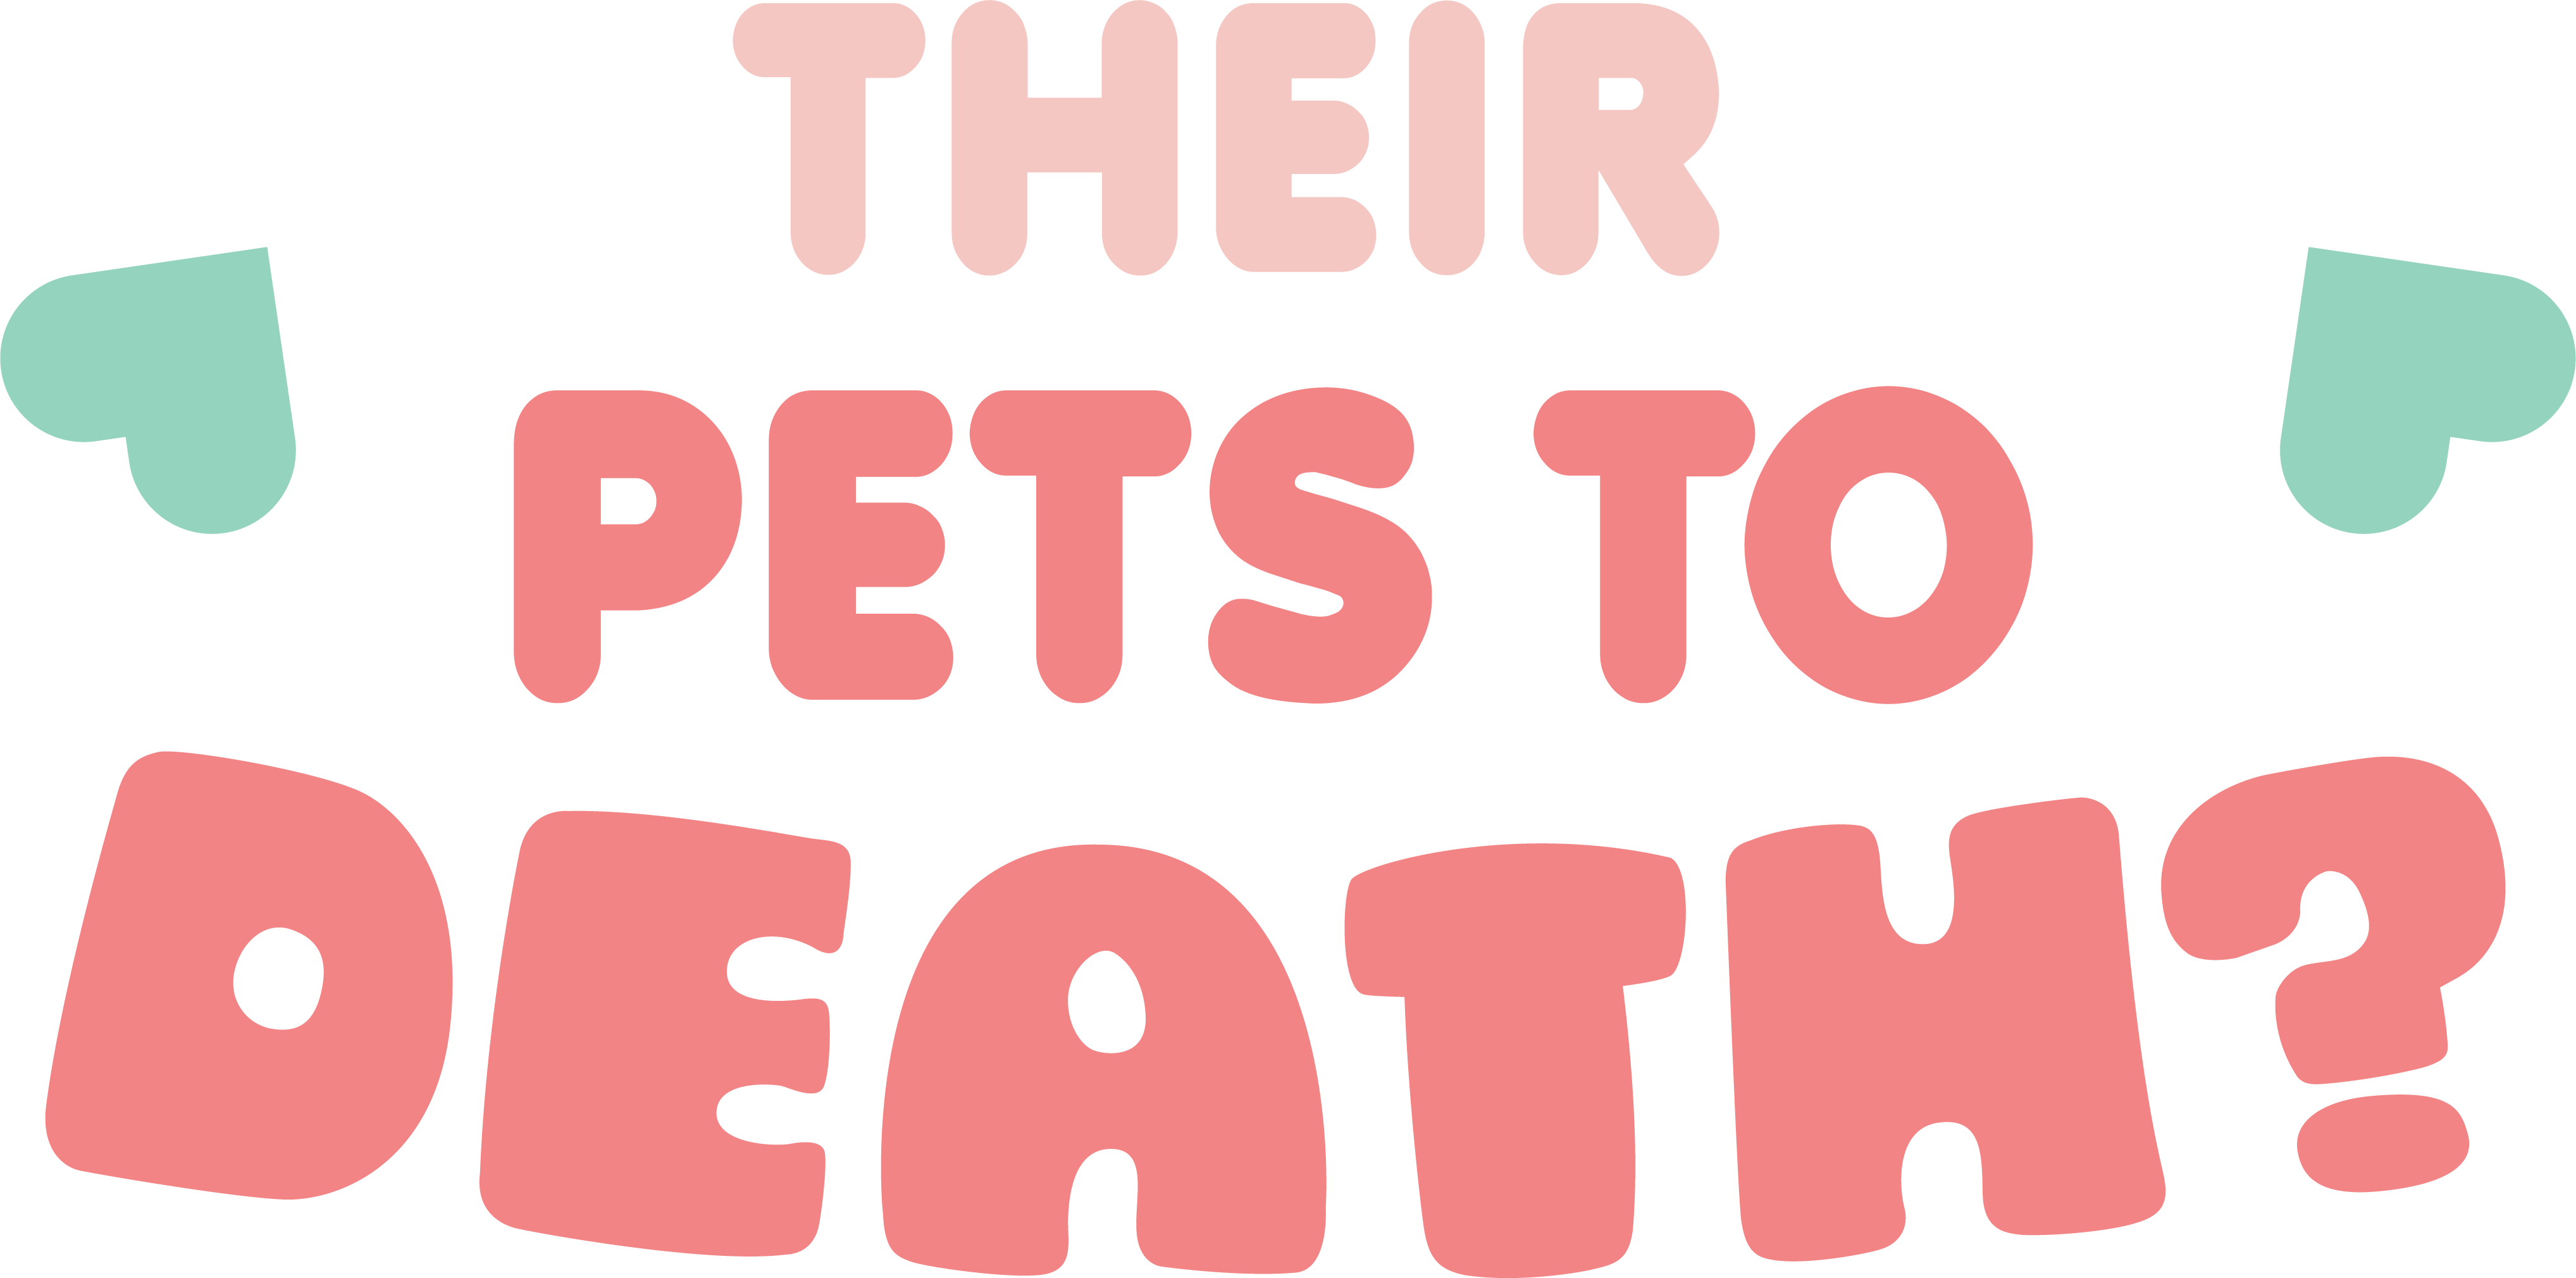 "Their Pets to Death?"